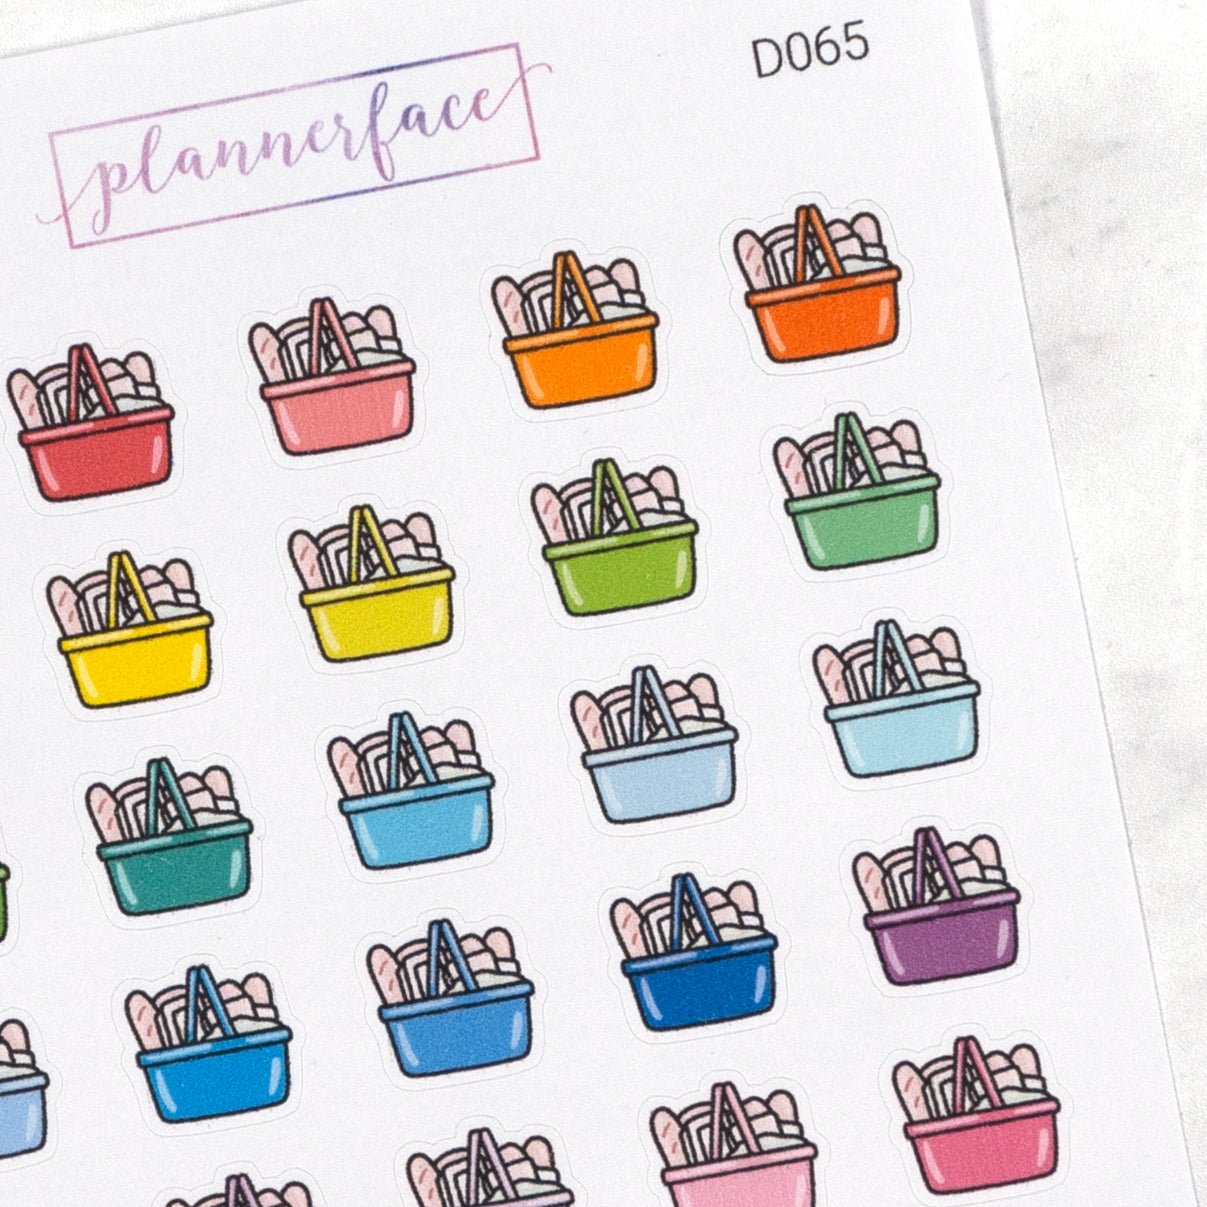 Grocery Basket Multicolour Doodles by Plannerface